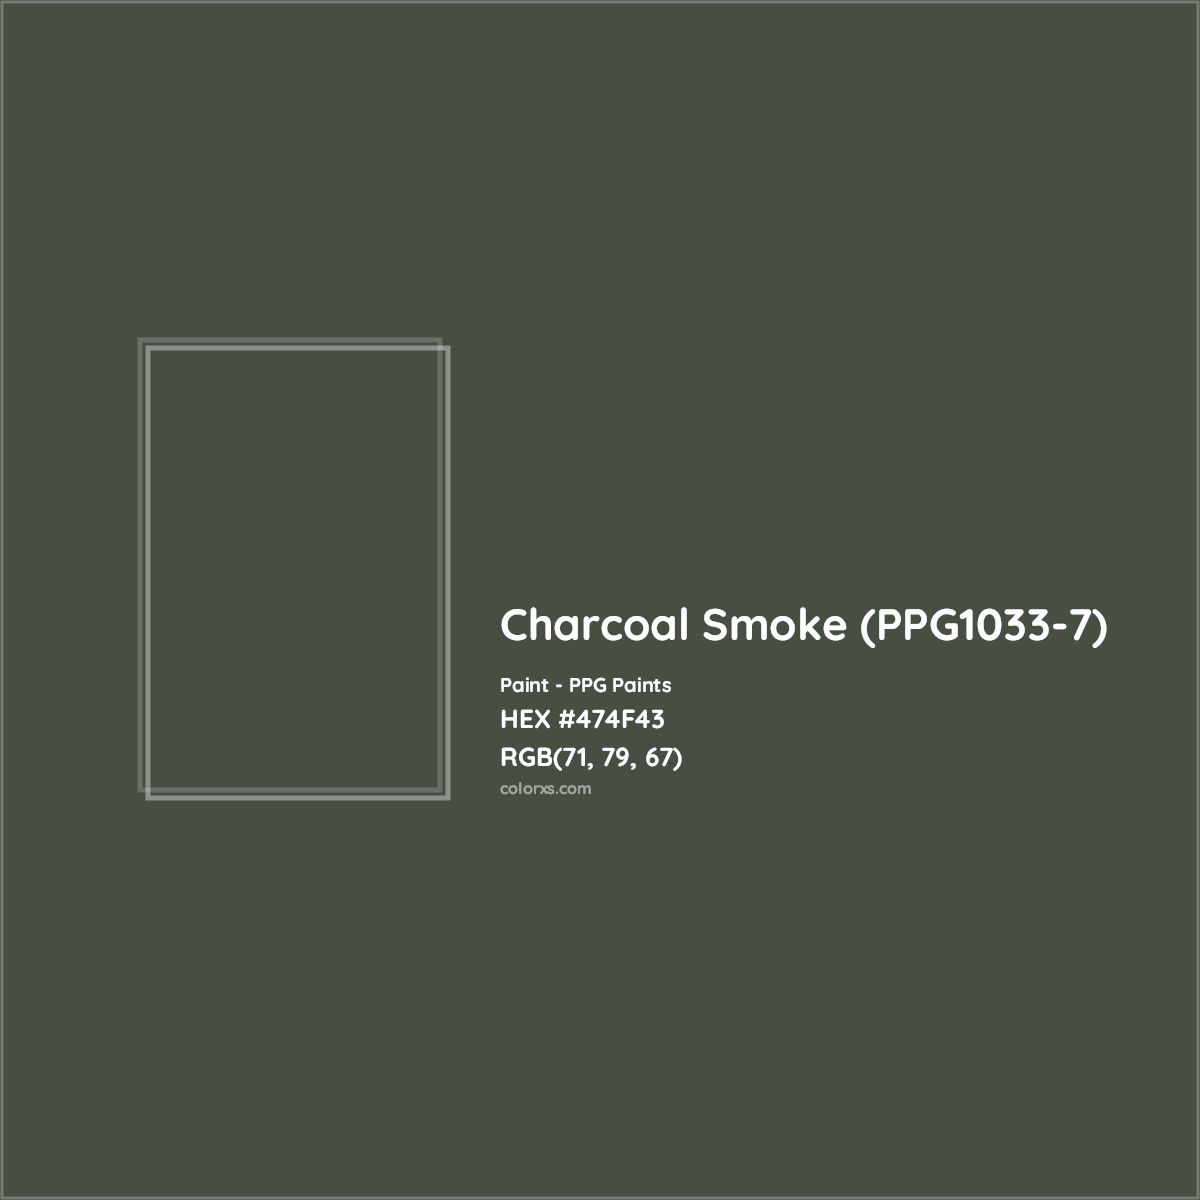 HEX #474F43 Charcoal Smoke (PPG1033-7) Paint PPG Paints - Color Code